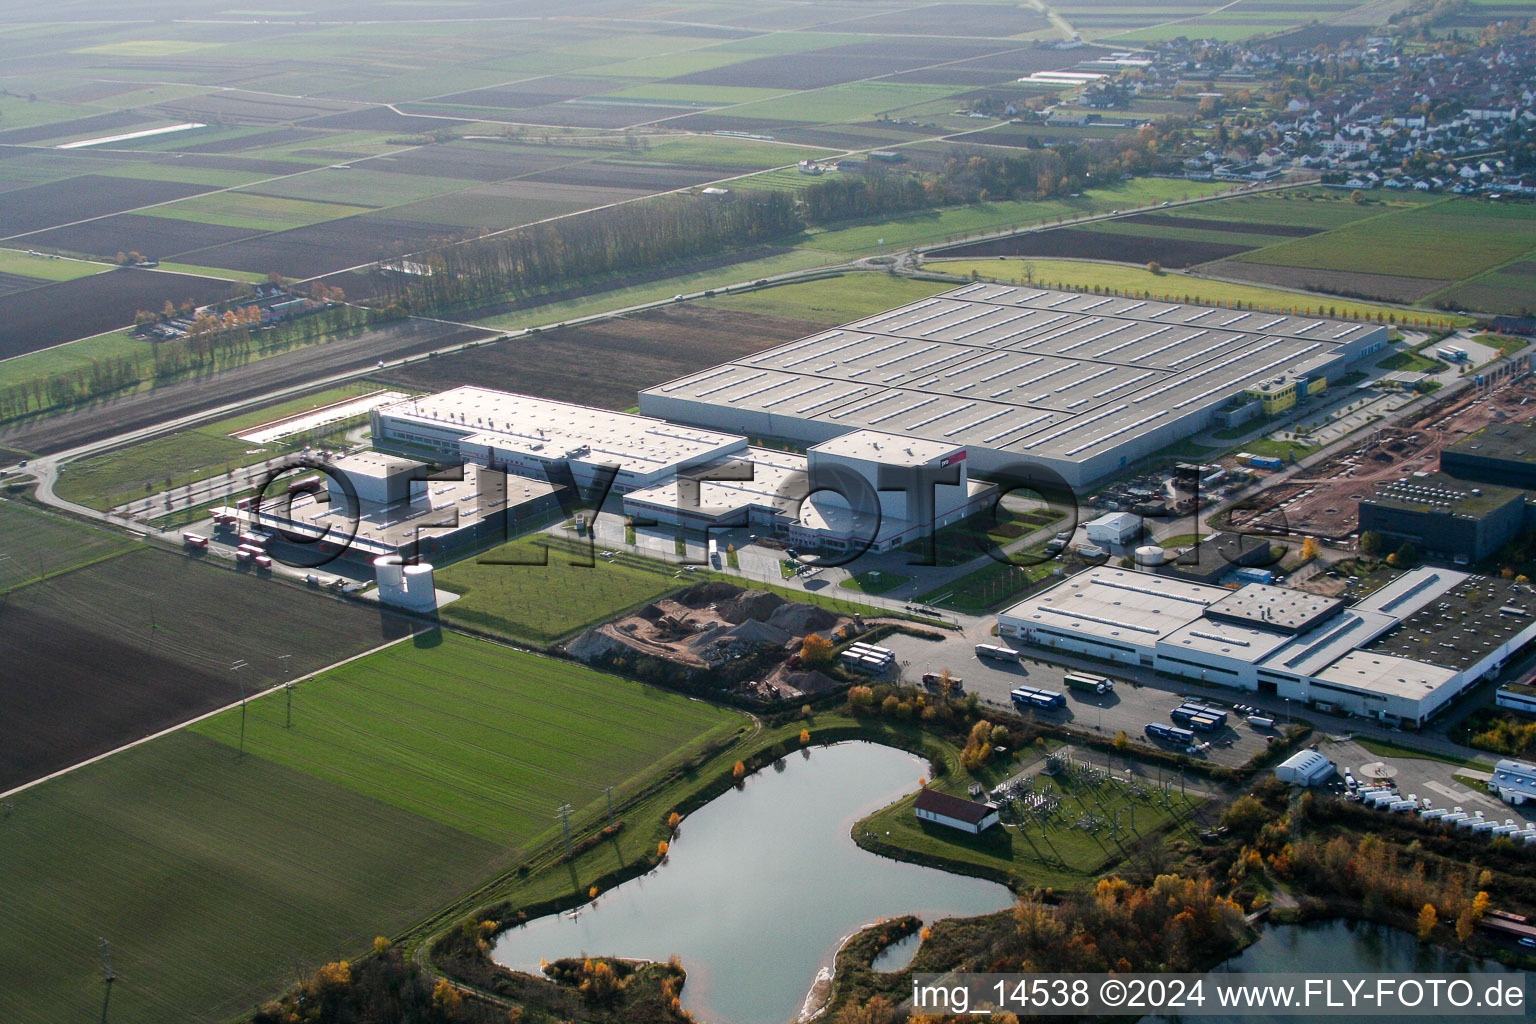 Building complex and grounds of the logistics center von Mercedes Benz in Offenbach an der Queich in the state Rhineland-Palatinate, Germany